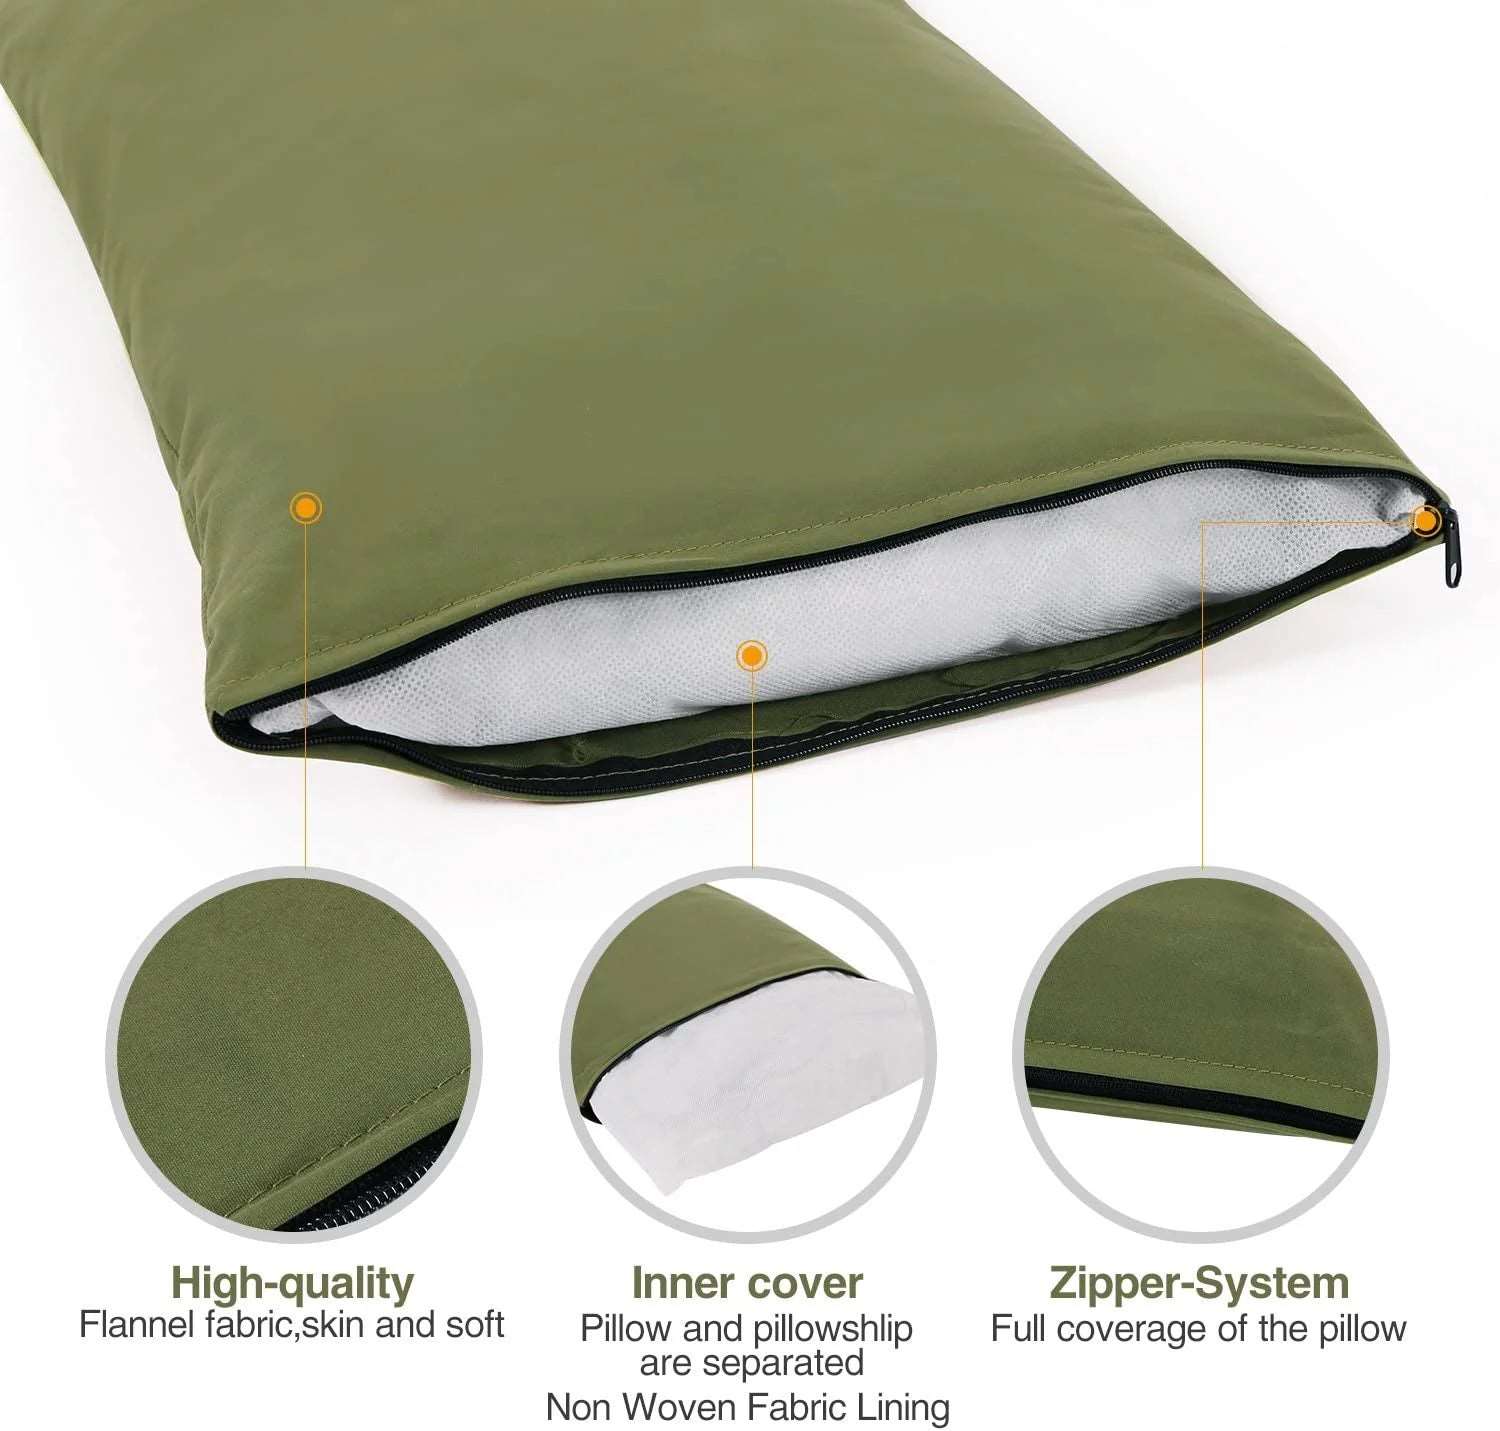 Small Camping Pillows for Sleeping